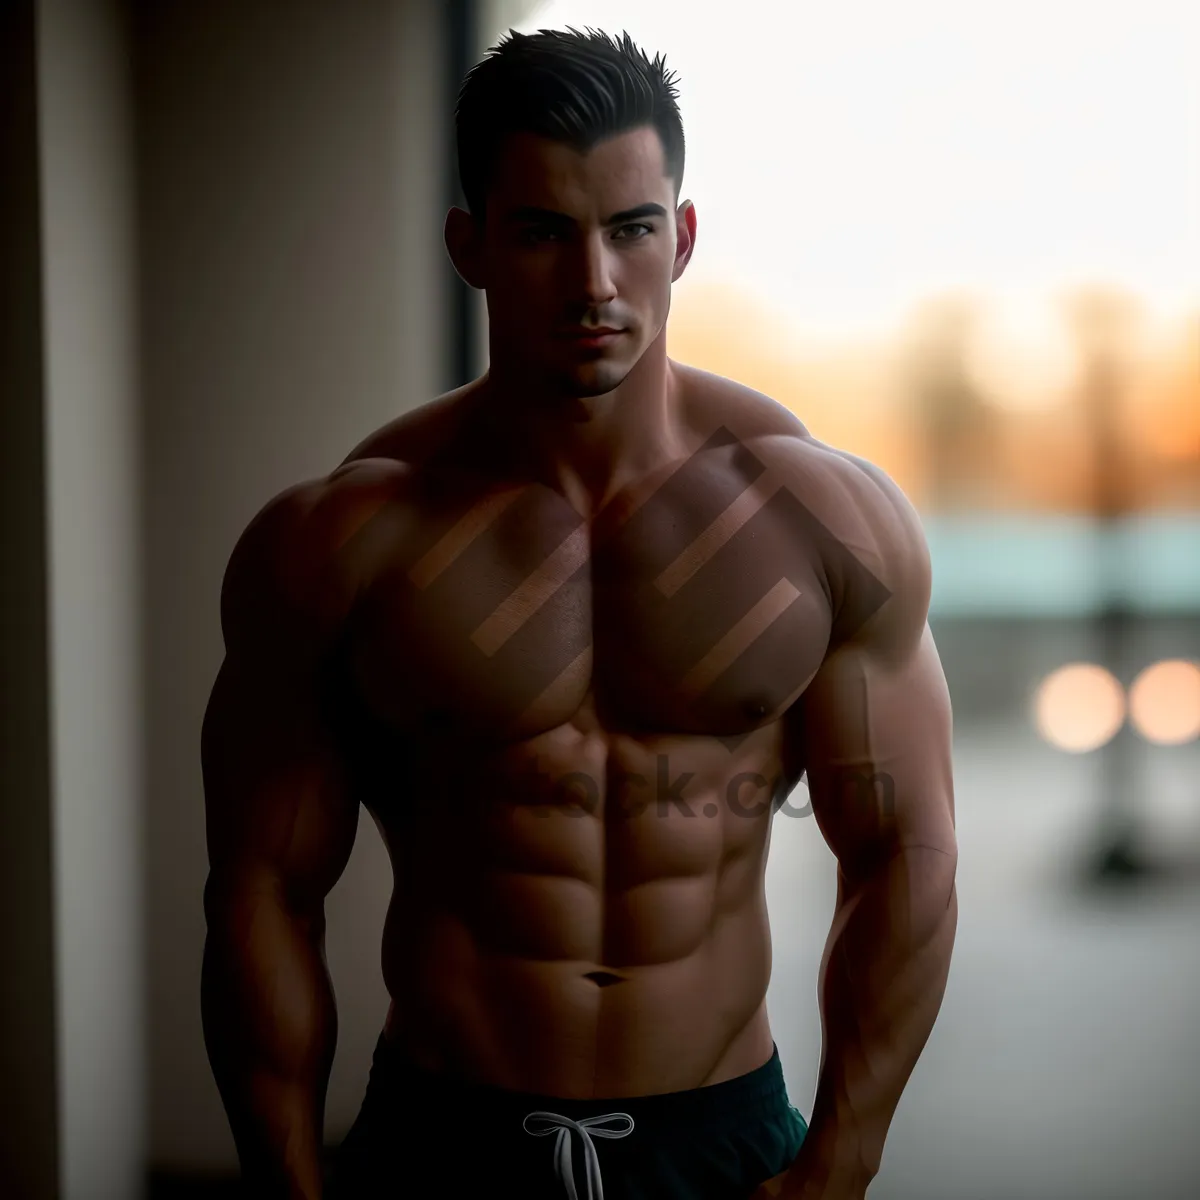 Picture of Muscular Male Bodybuilder Posing With Authority